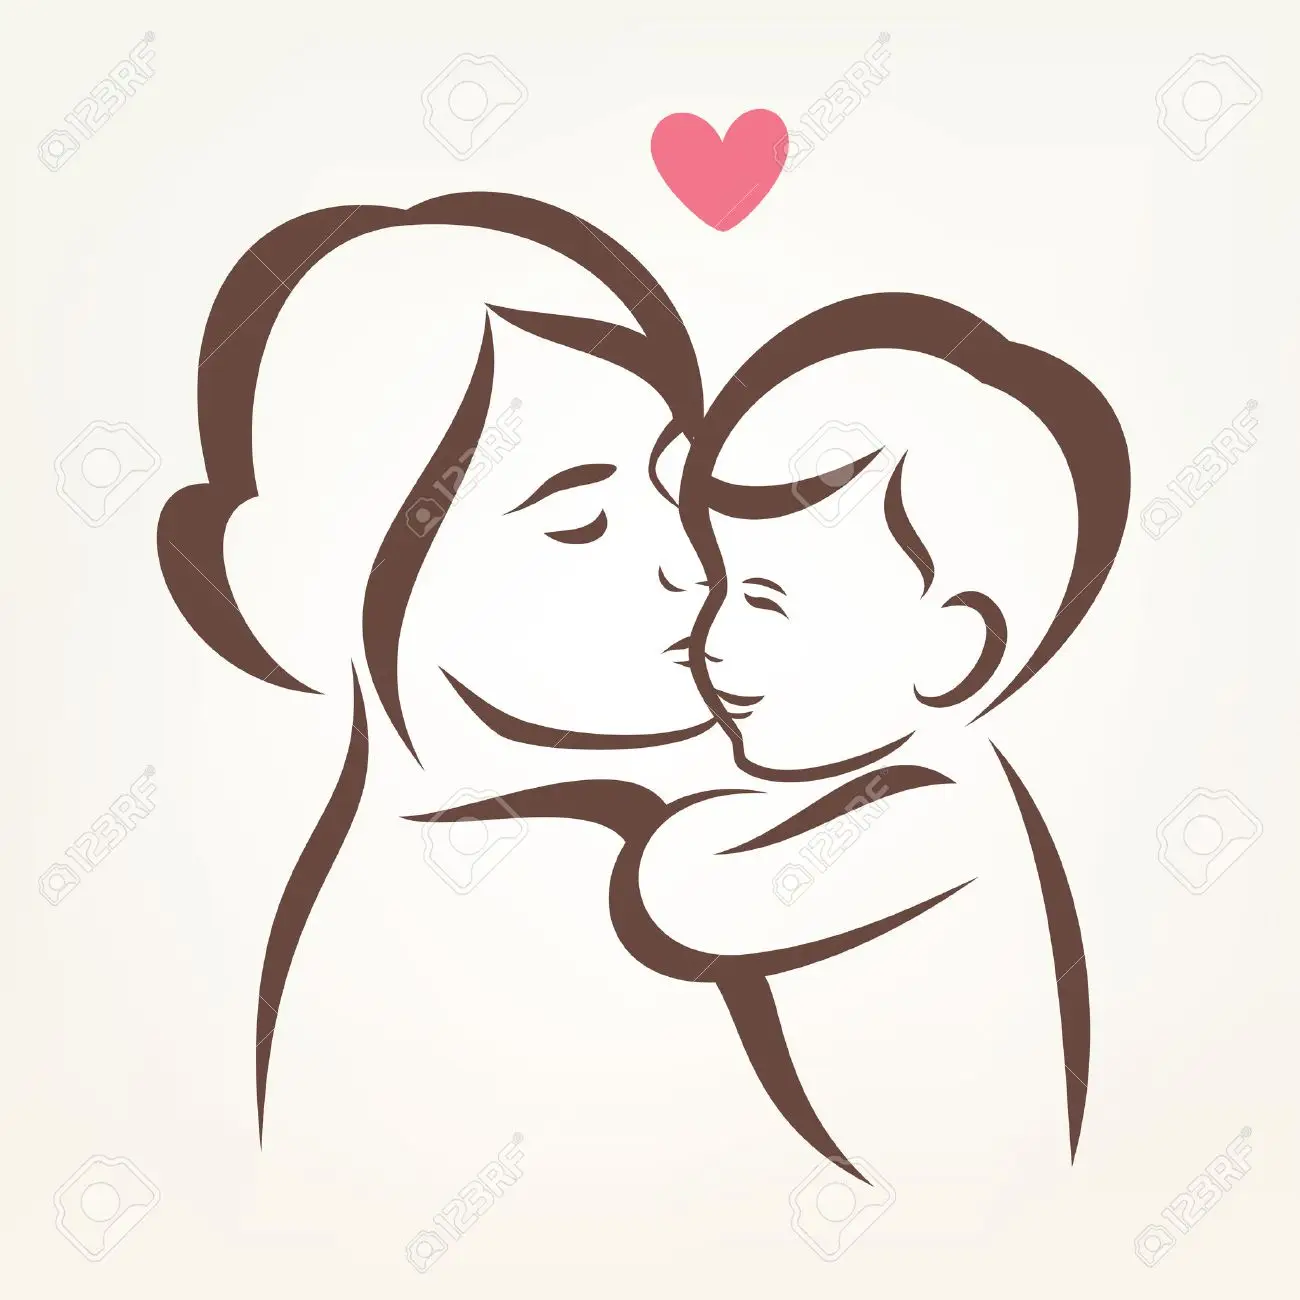 Mother And Son Stylized Vector Silhouette, Outlined Sketch Of Mom And Child  Royalty Free Cliparts, Vectors, And Stock Illustration. Image 38998743.